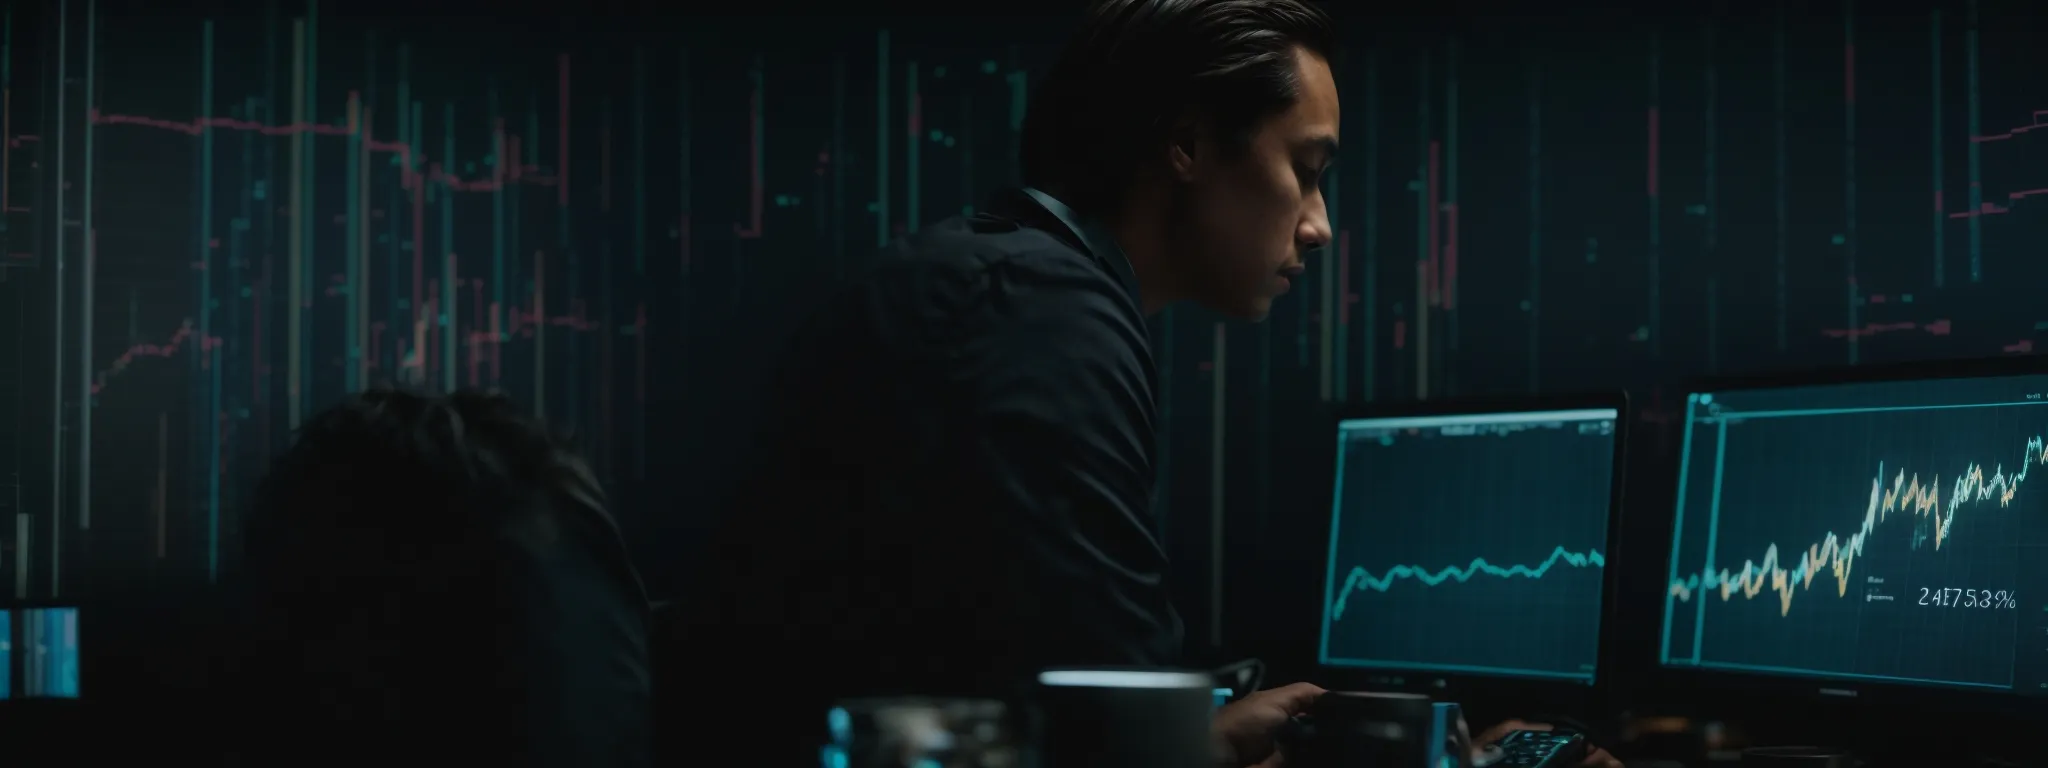 a strategist intensely scrutinizes a computer screen showing graph trends and search volume data.